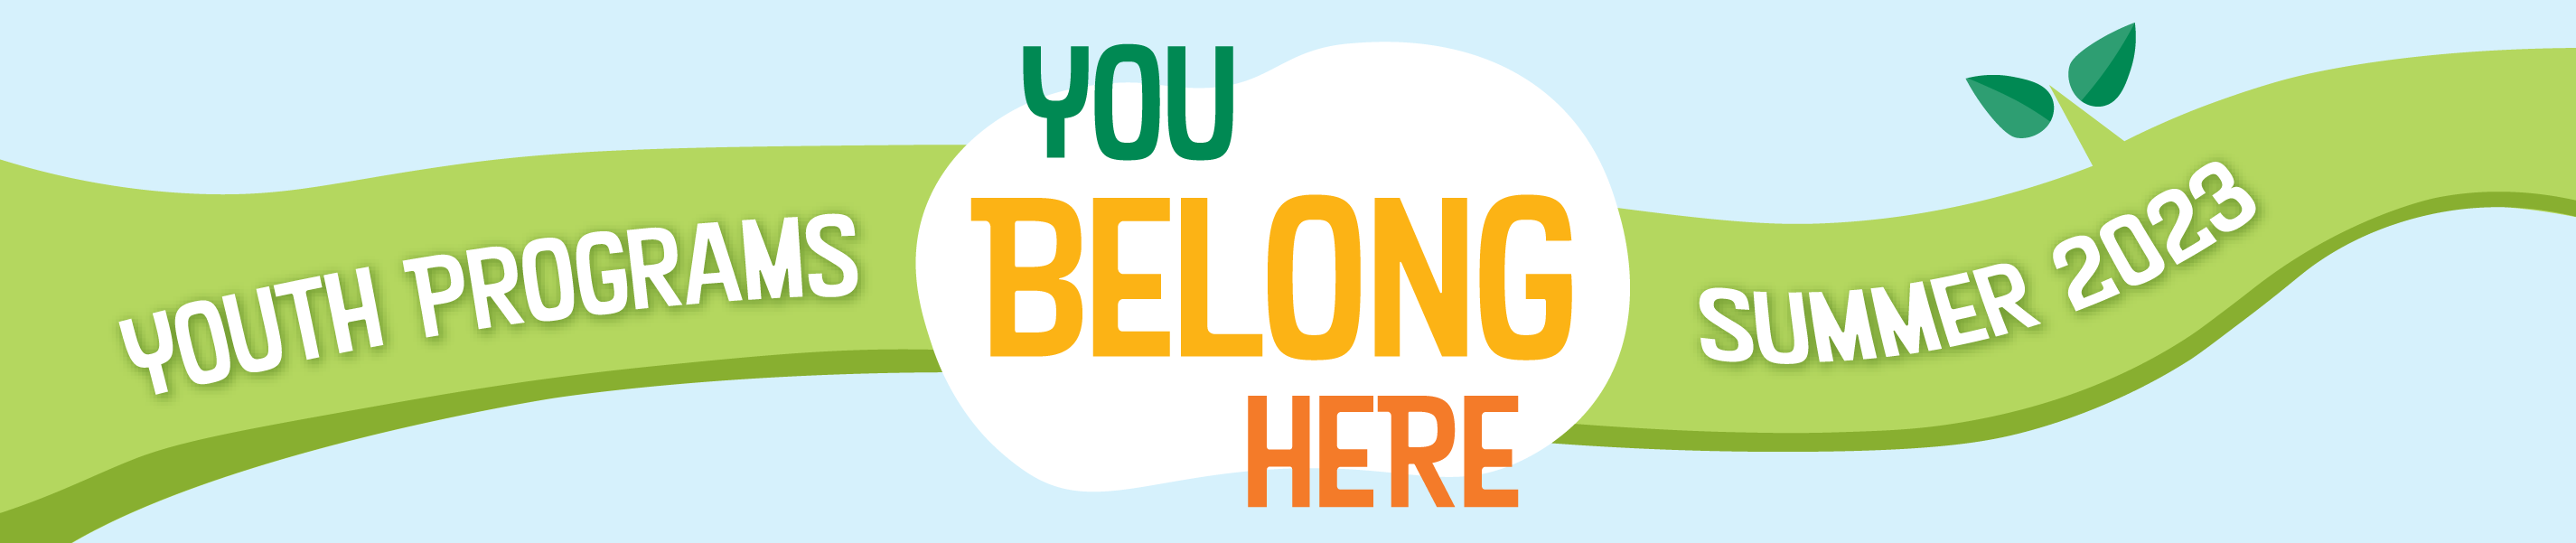 illustrated design a green branch with the text "You Belong Here, Youth Programs Summer 2023"